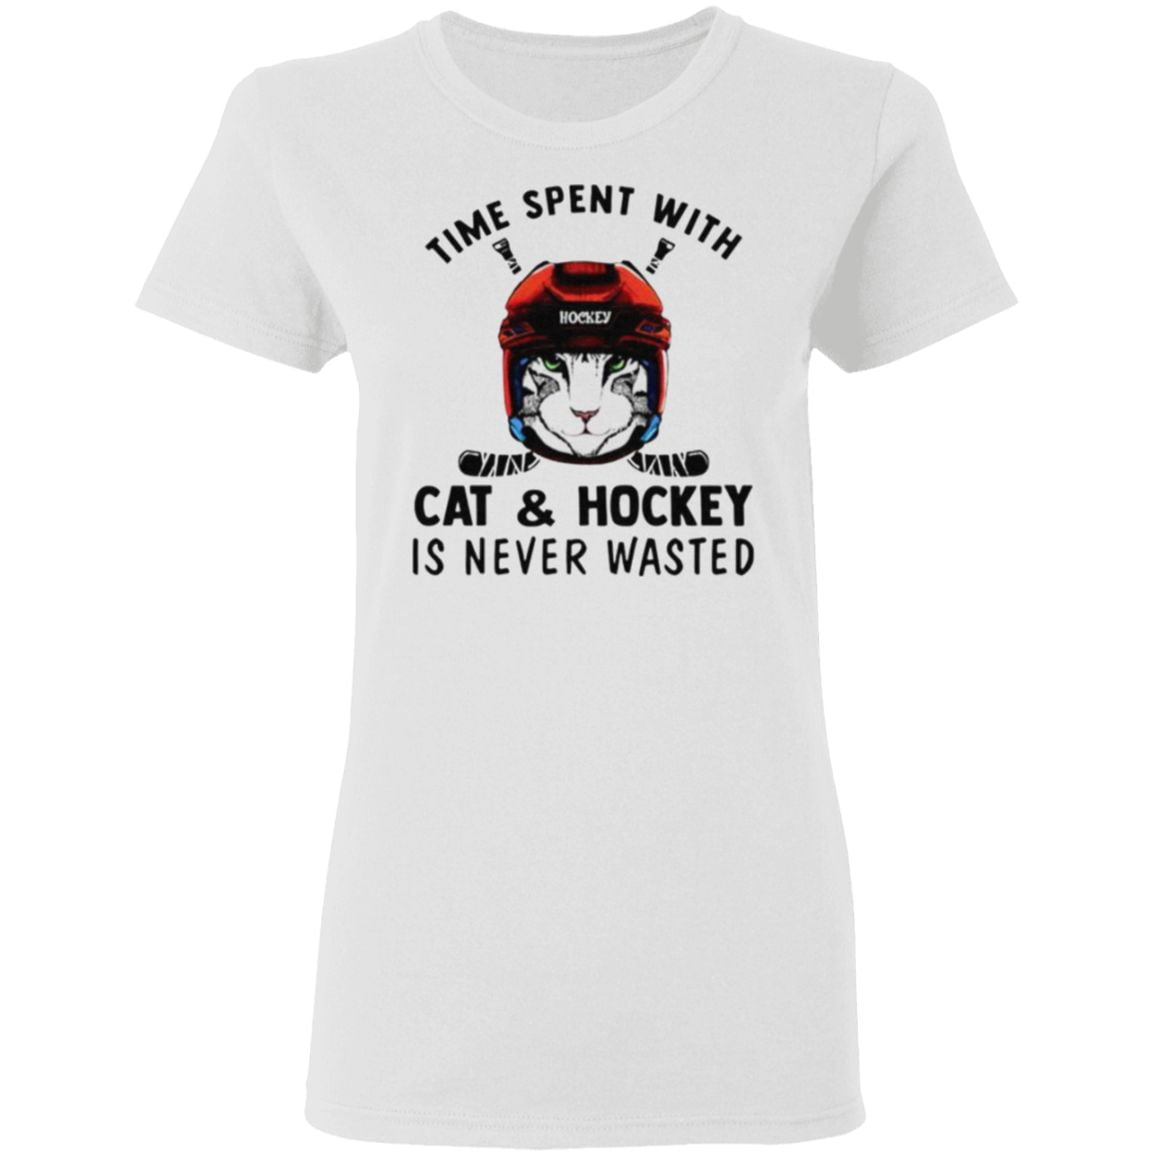 Time spent with cat and hockey is never wasted T shirt